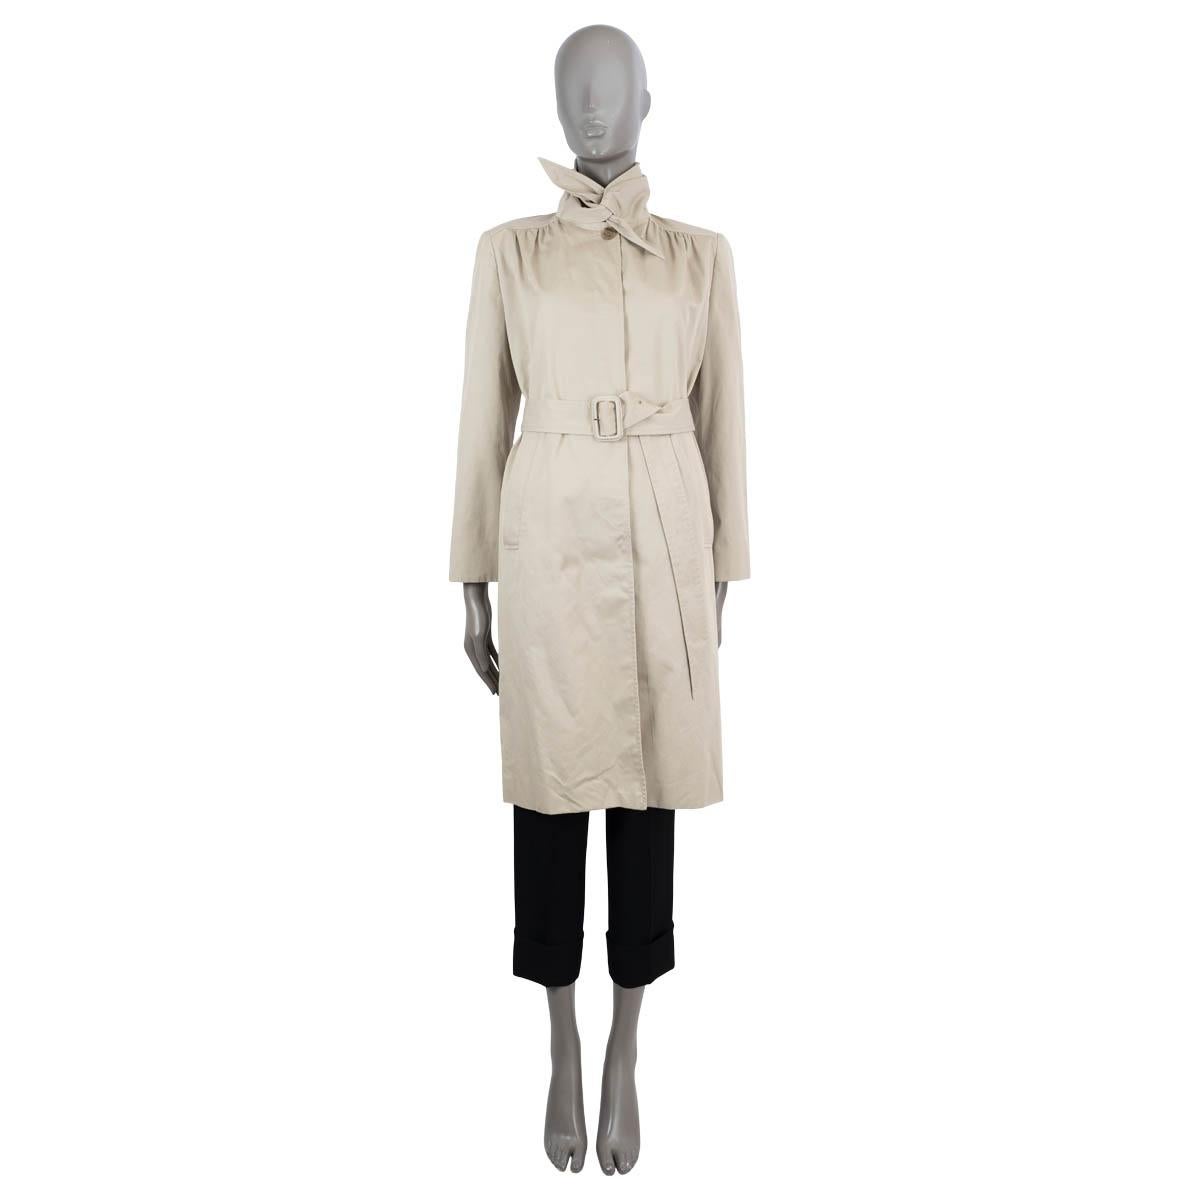 100% authentic Balenciaga scarf trench coat in gaberdine cotton (100%). Features an oversized collar that can be tied like a neck scarf, matching belt, two slant pockets and gathered shoulders. Closes with concealed buttons on the front. Lined in